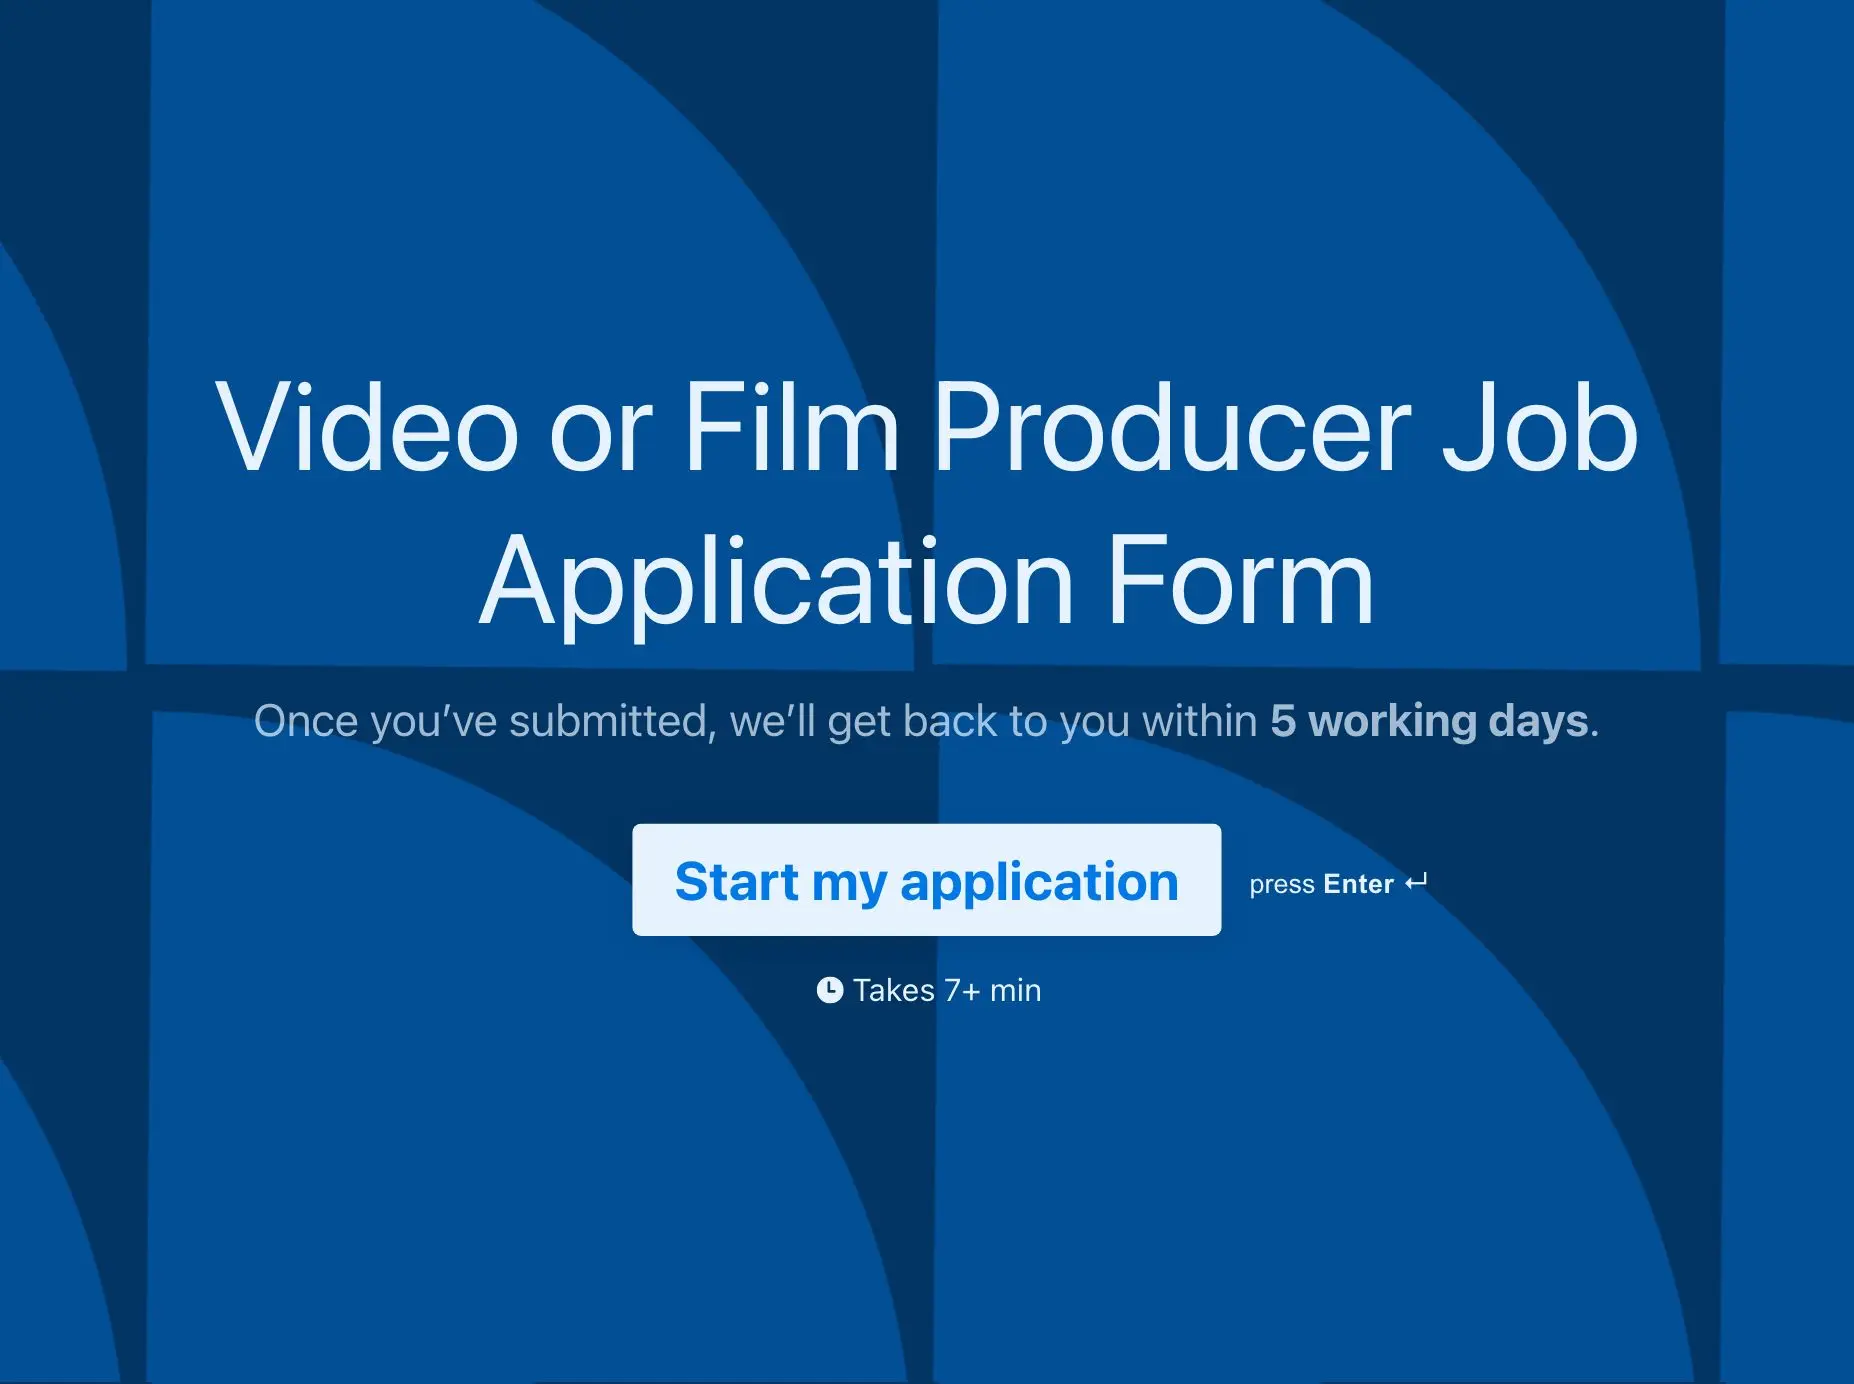 Video or Film Producer Job Application Form Template Hero